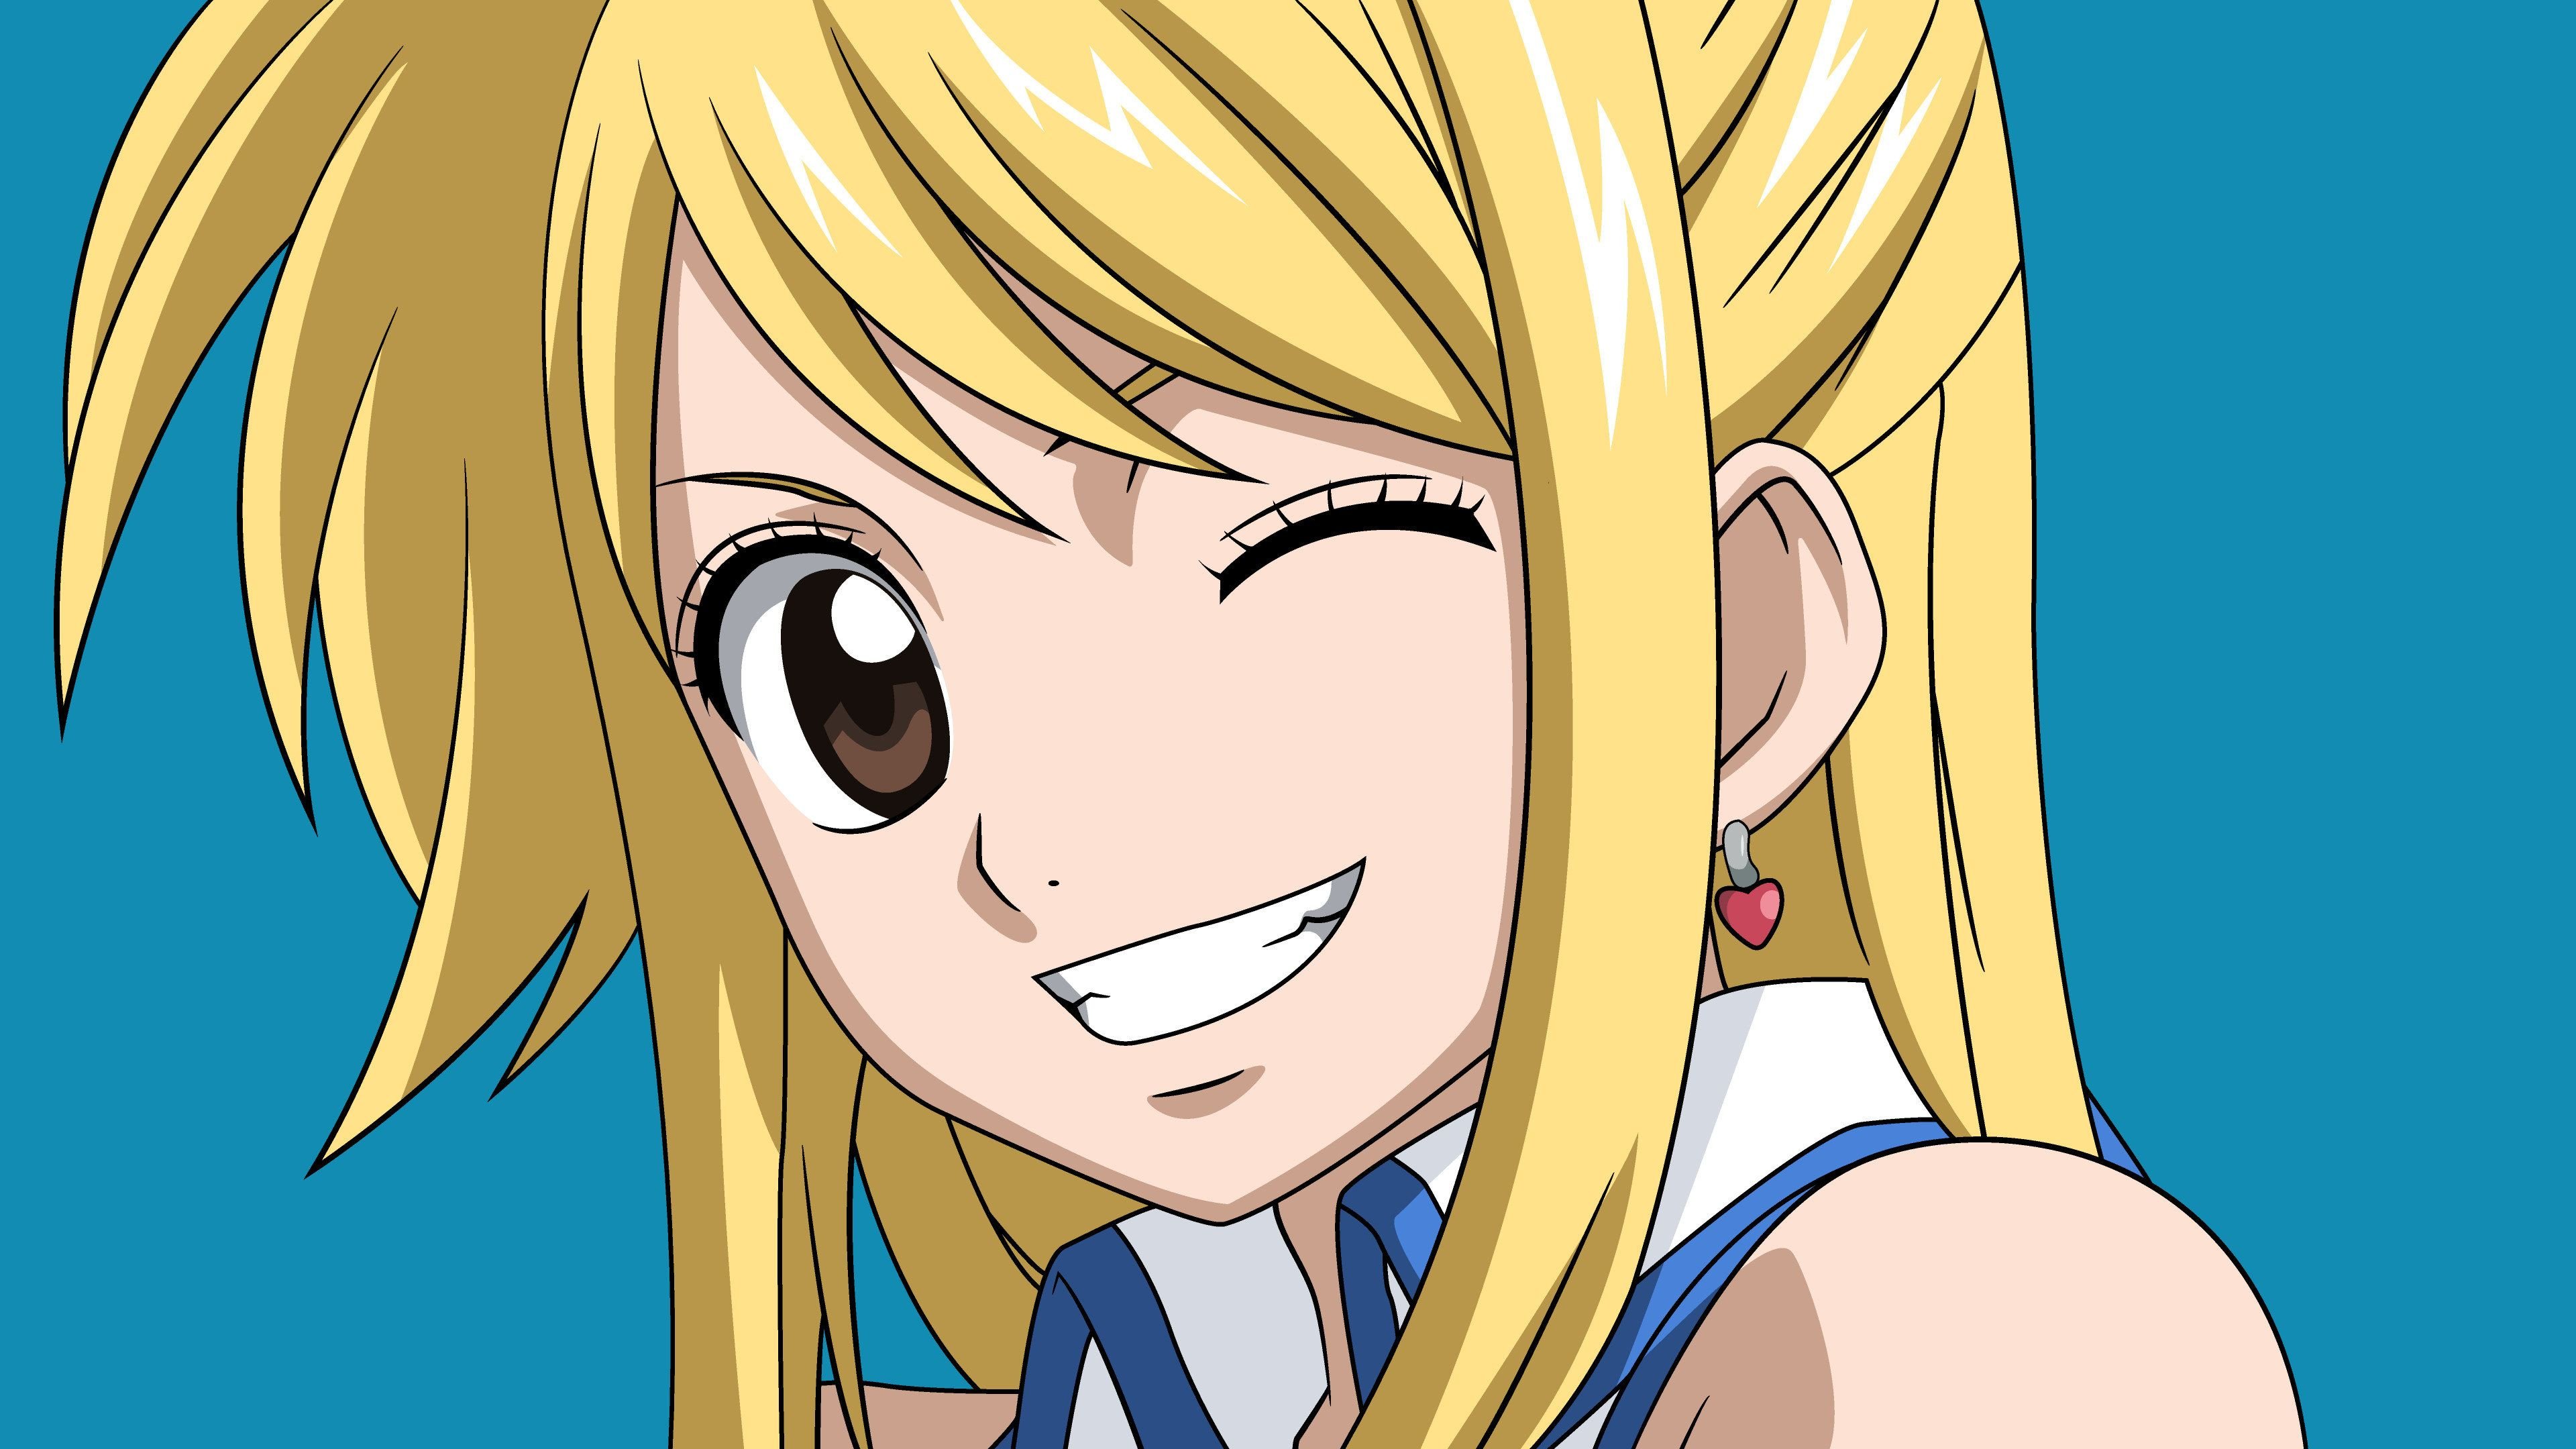 10. Lucy Heartfilia from Fairy Tail - wide 2